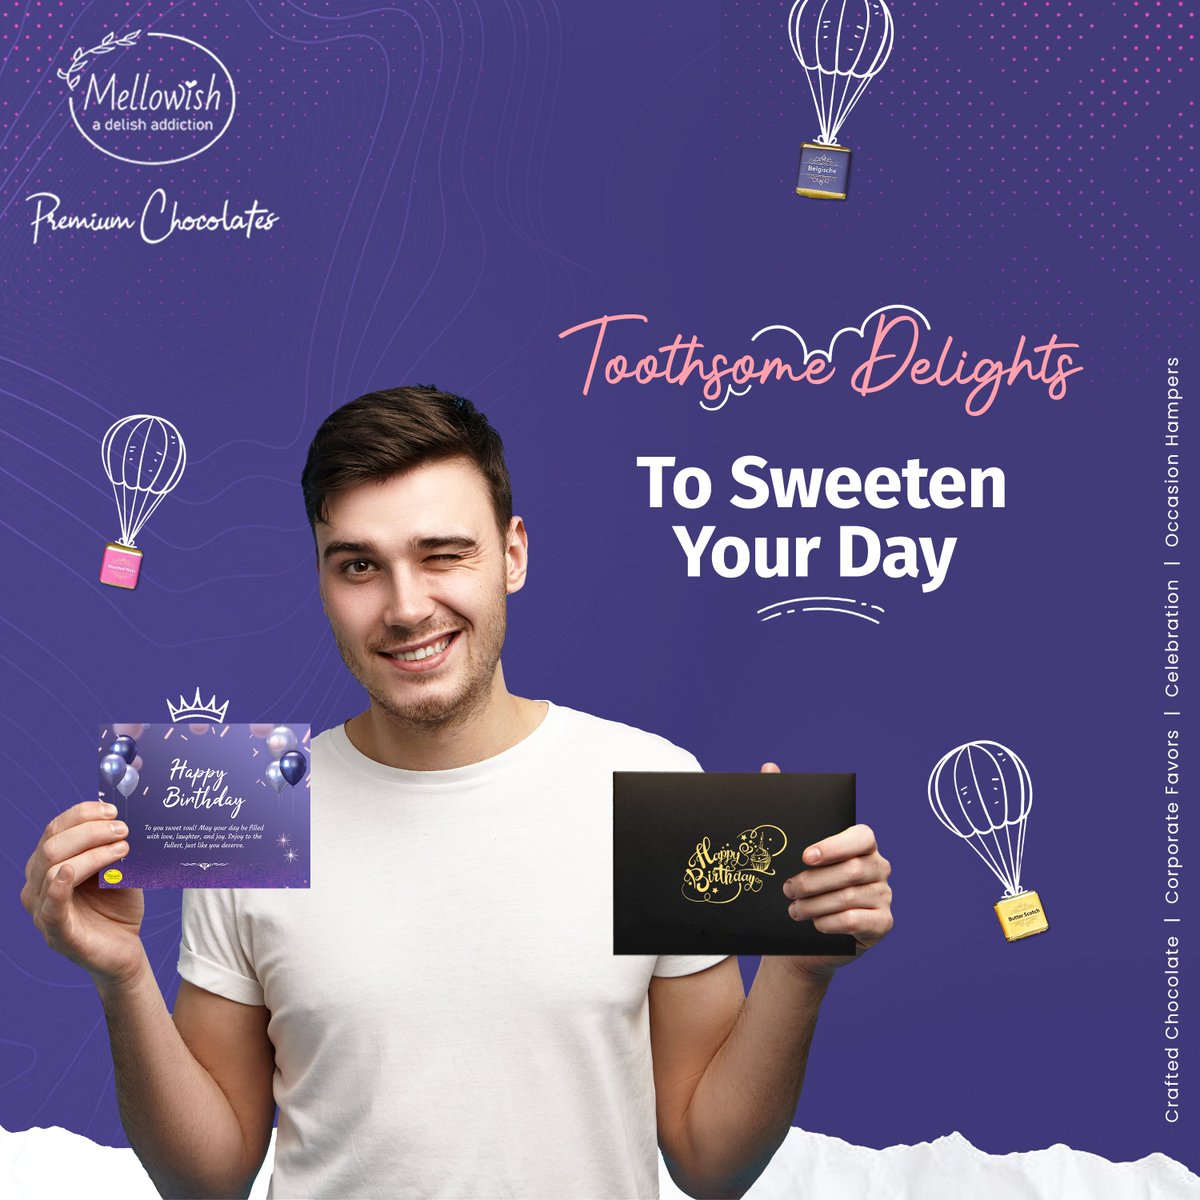 A birthday is not complete without Mellowish's toothsome delights! 
Coming Soon to indulge you in our heavenly creations. 

#MellowishChocolates #PremiumChocolates #ArtisanalChocolate #HandcraftedChocolates #IndulgentTreats #LuxuryChocolates #ChocoholicDelight #GourmetChocolates